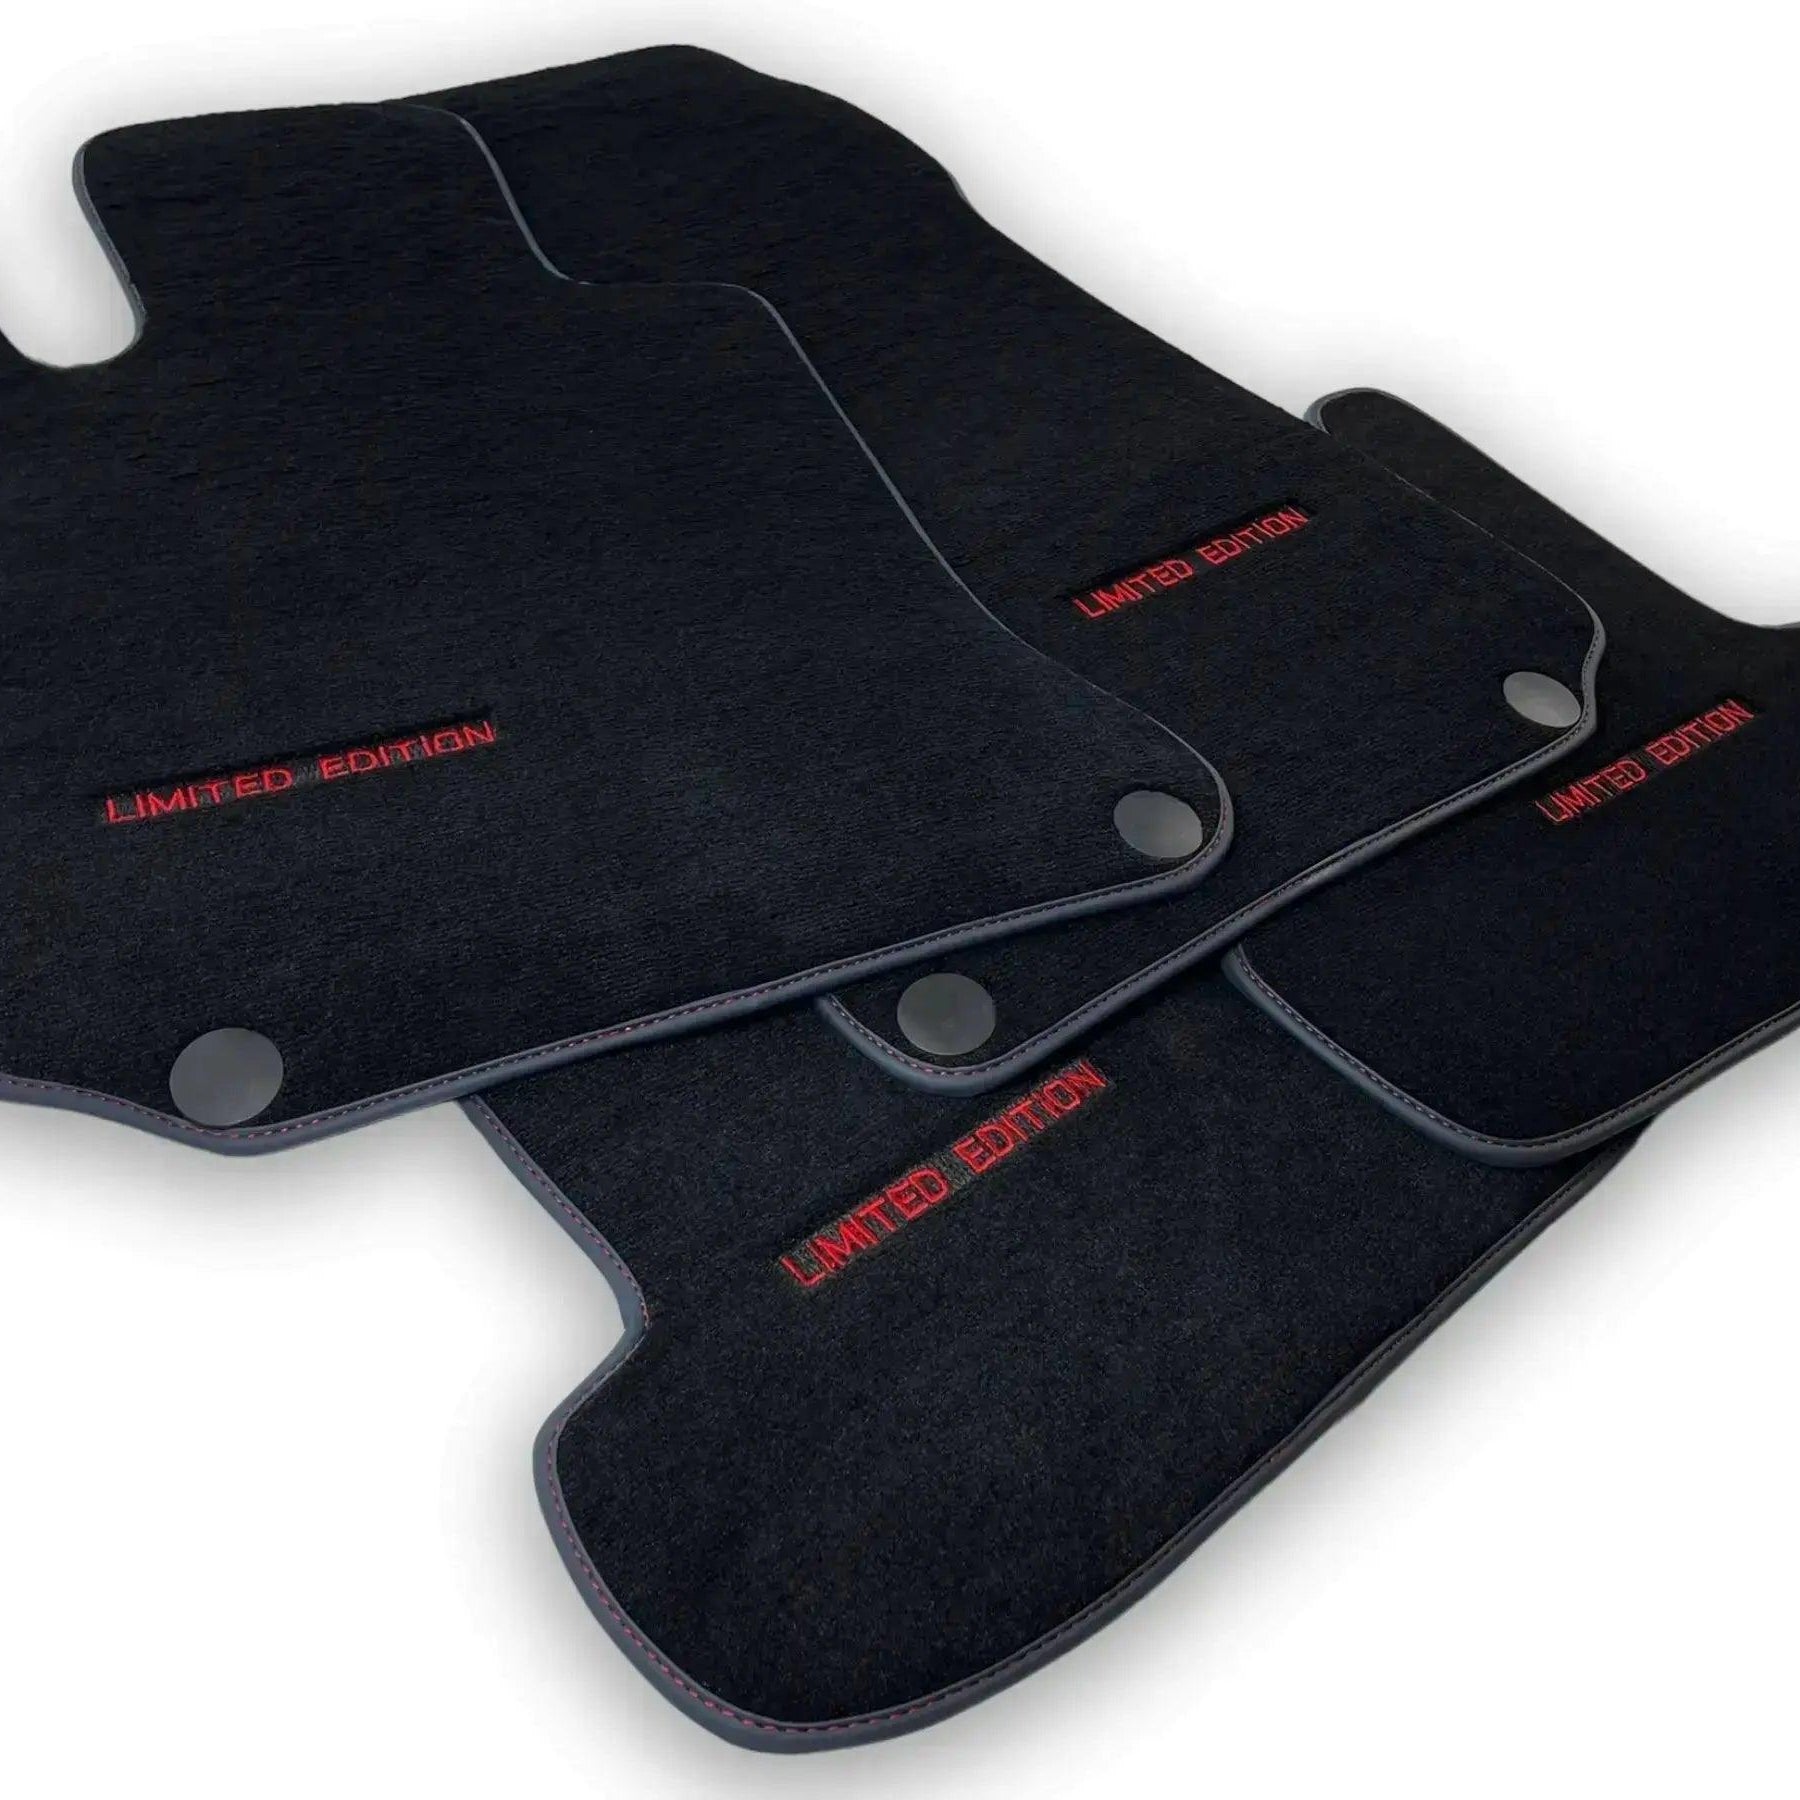 Black Floor Mats For Mercedes Benz GLA-Class H247 (2020-2023) | Limited Edition